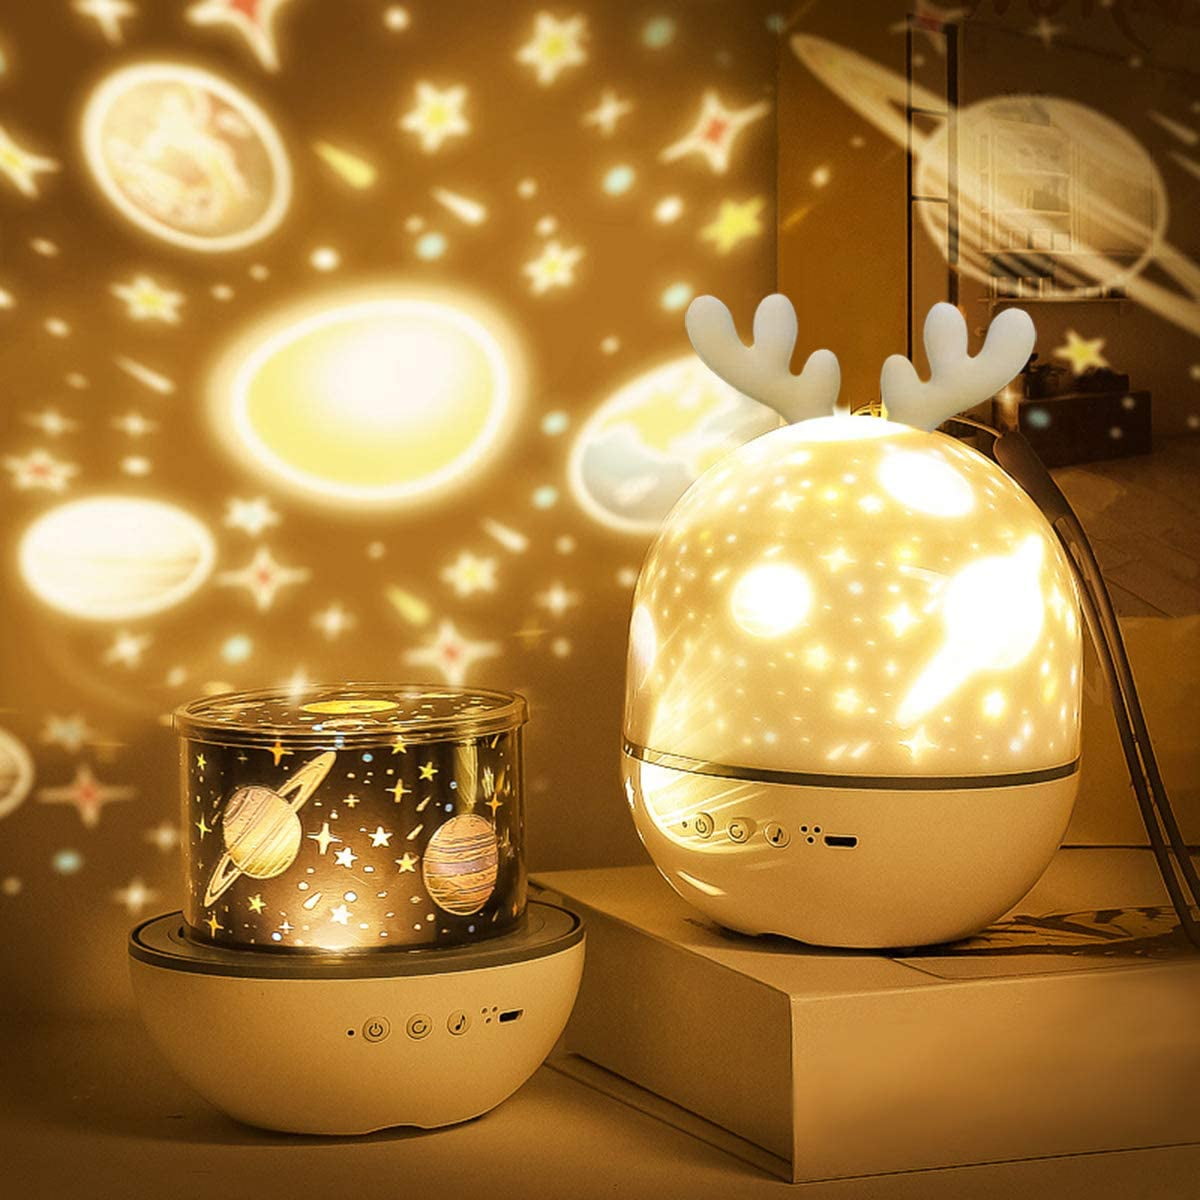 Musical Night Light,360 Rotating Star Lamp Baby Musical Lamp with Rechargeable Battery,12 Songs to Relax for Sleep Kids Babies Birthday Children Day Gift Black Black with Music 